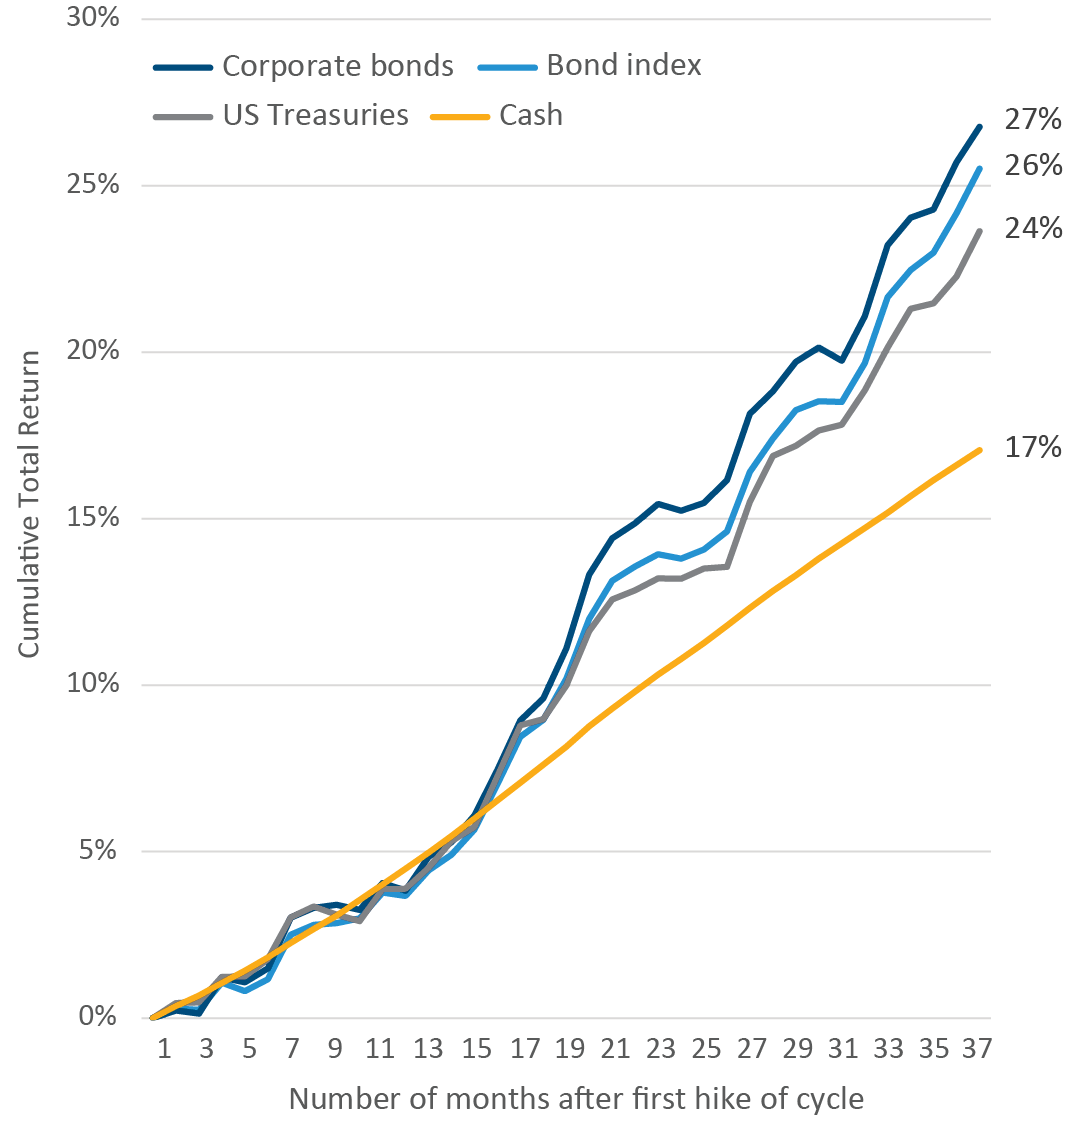 Three-year cumulative return after first hike for bond, corporate, treasury, and cash indices